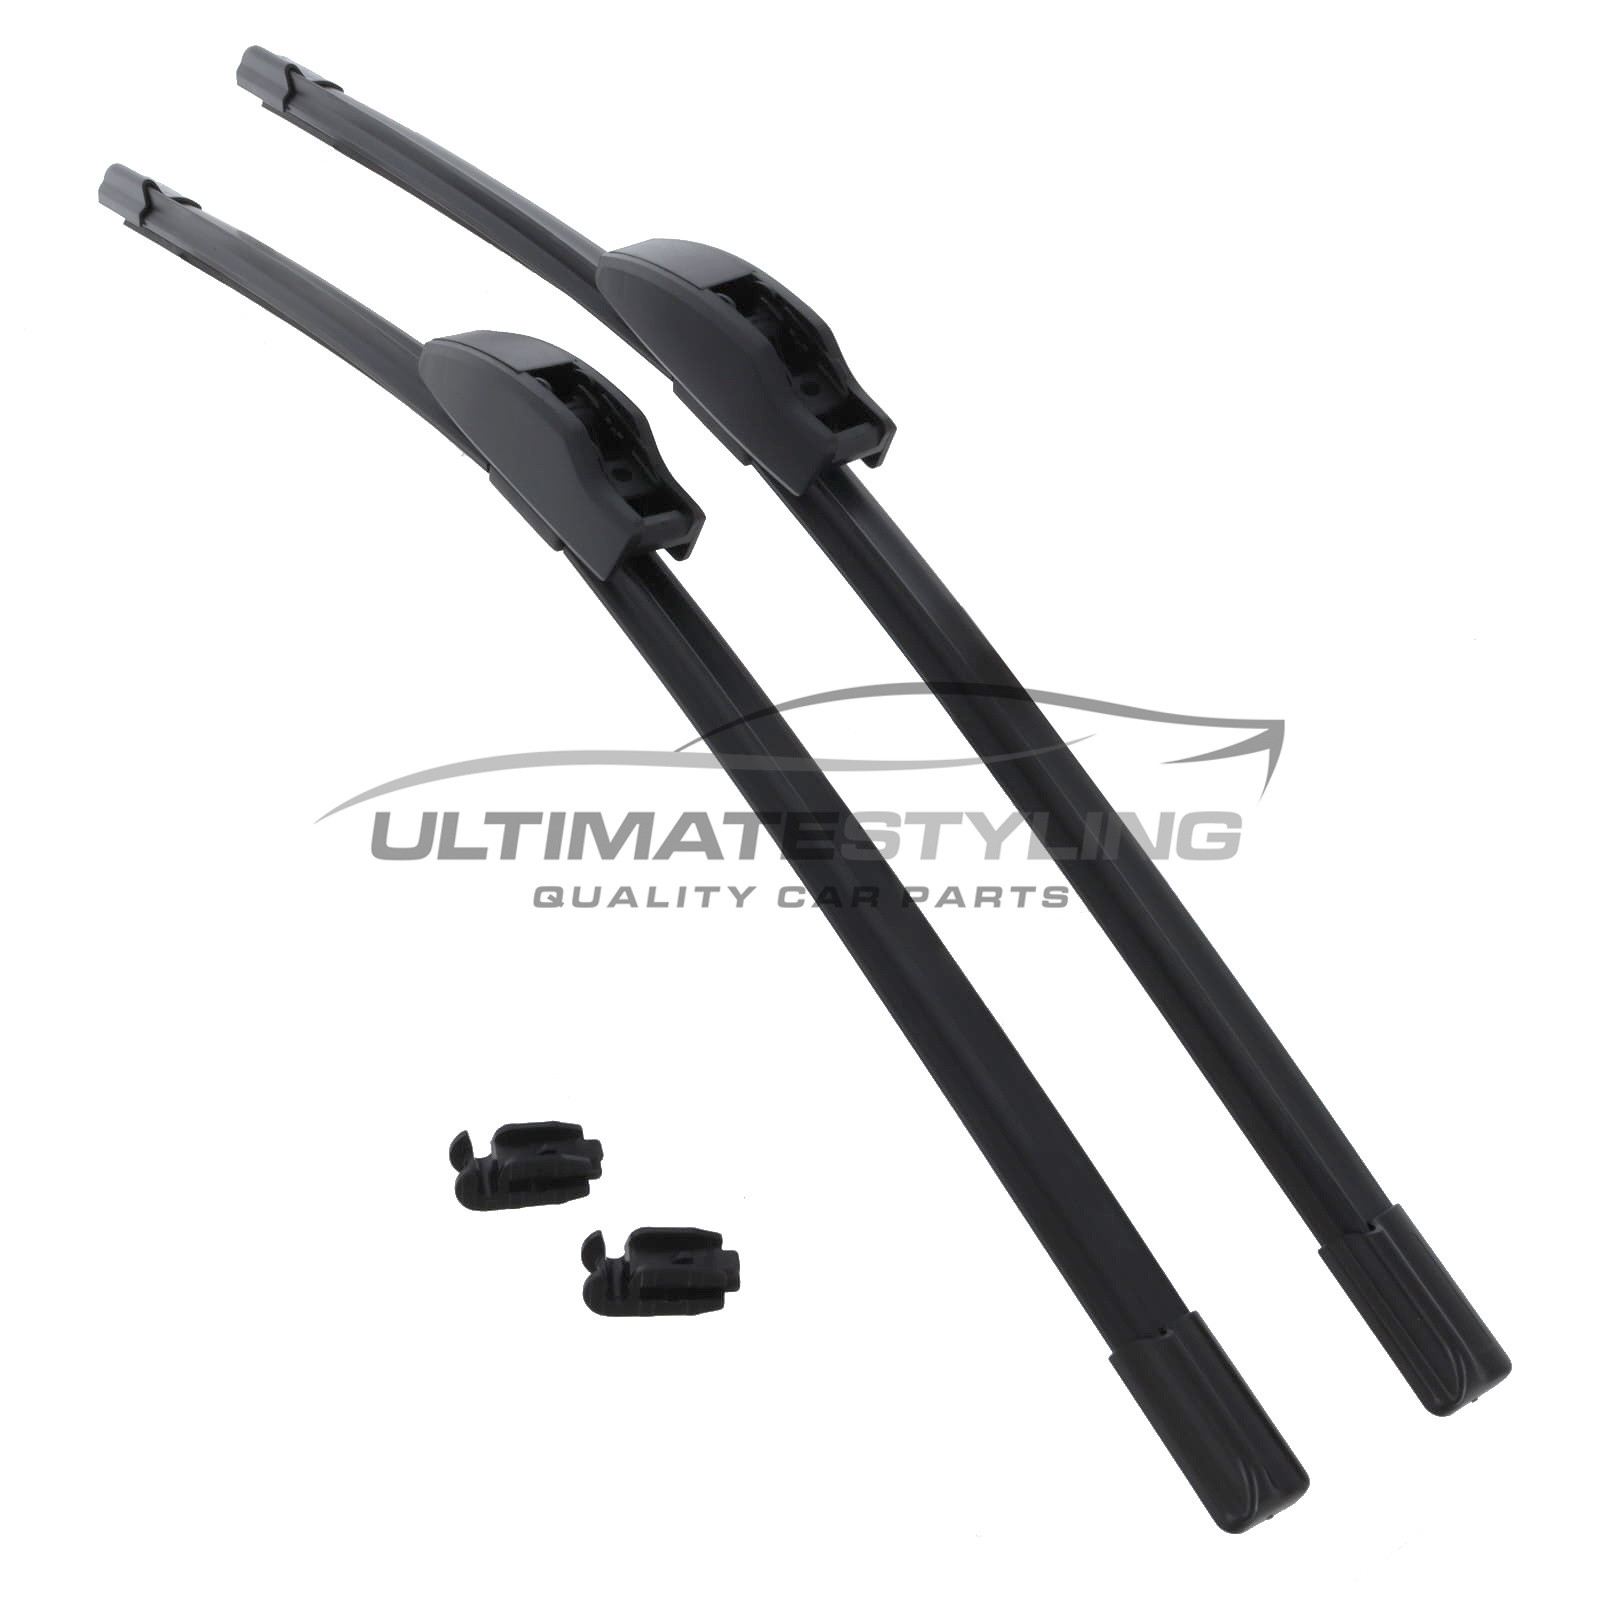 Drivers Side & Passenger Side (Front) Wiper Blades for Vauxhall Carlton